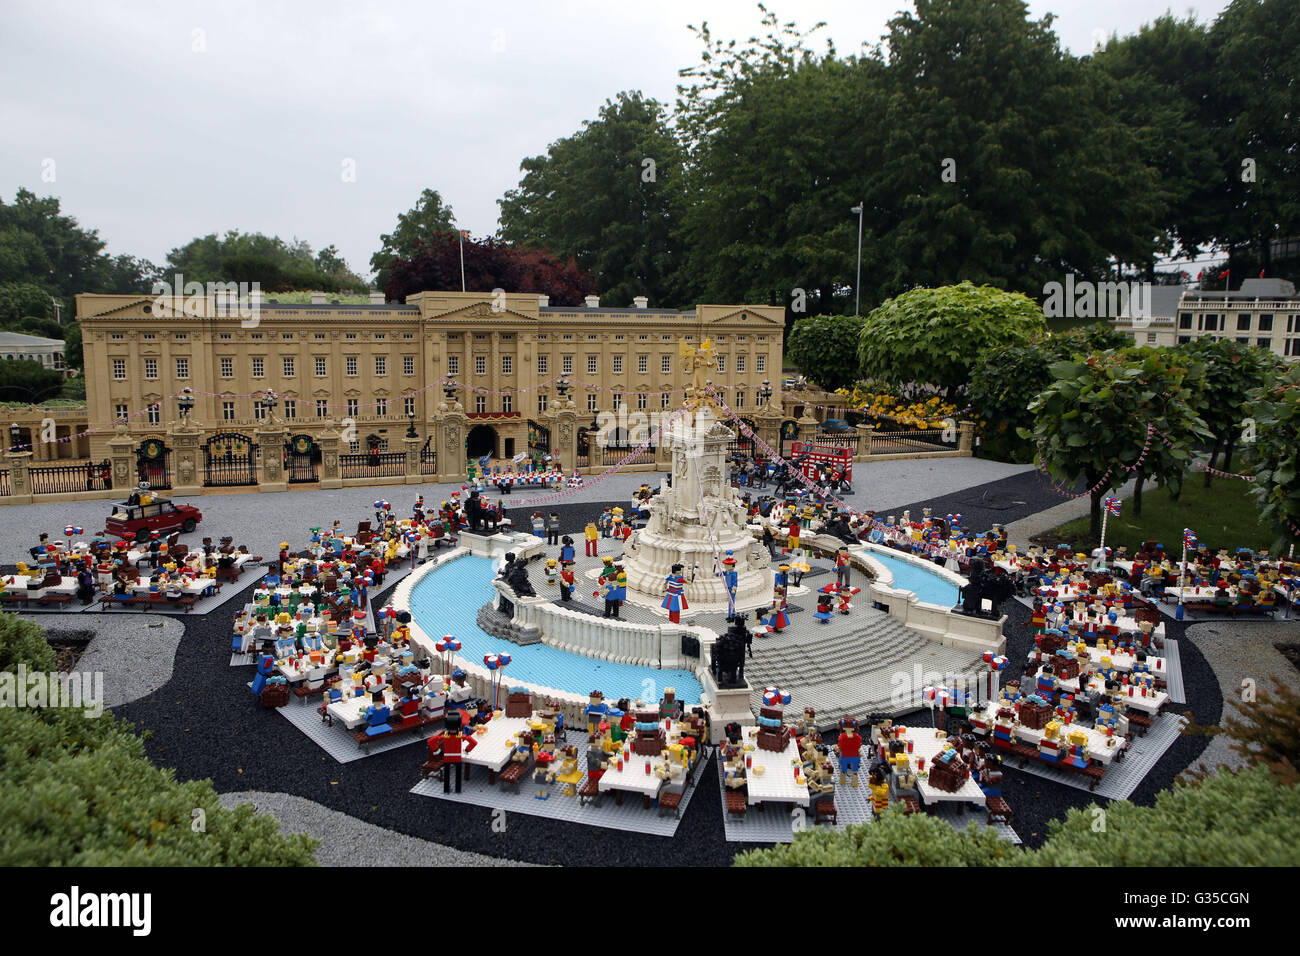 LEGOLAND Windsor Resort in Windsor unveils a miniature street party outside a model of Buckingham Palace in Miniland ahead of the Patron's Lunch on The Mall in London to mark the Queen's official 90th birthday on June 12. Stock Photo